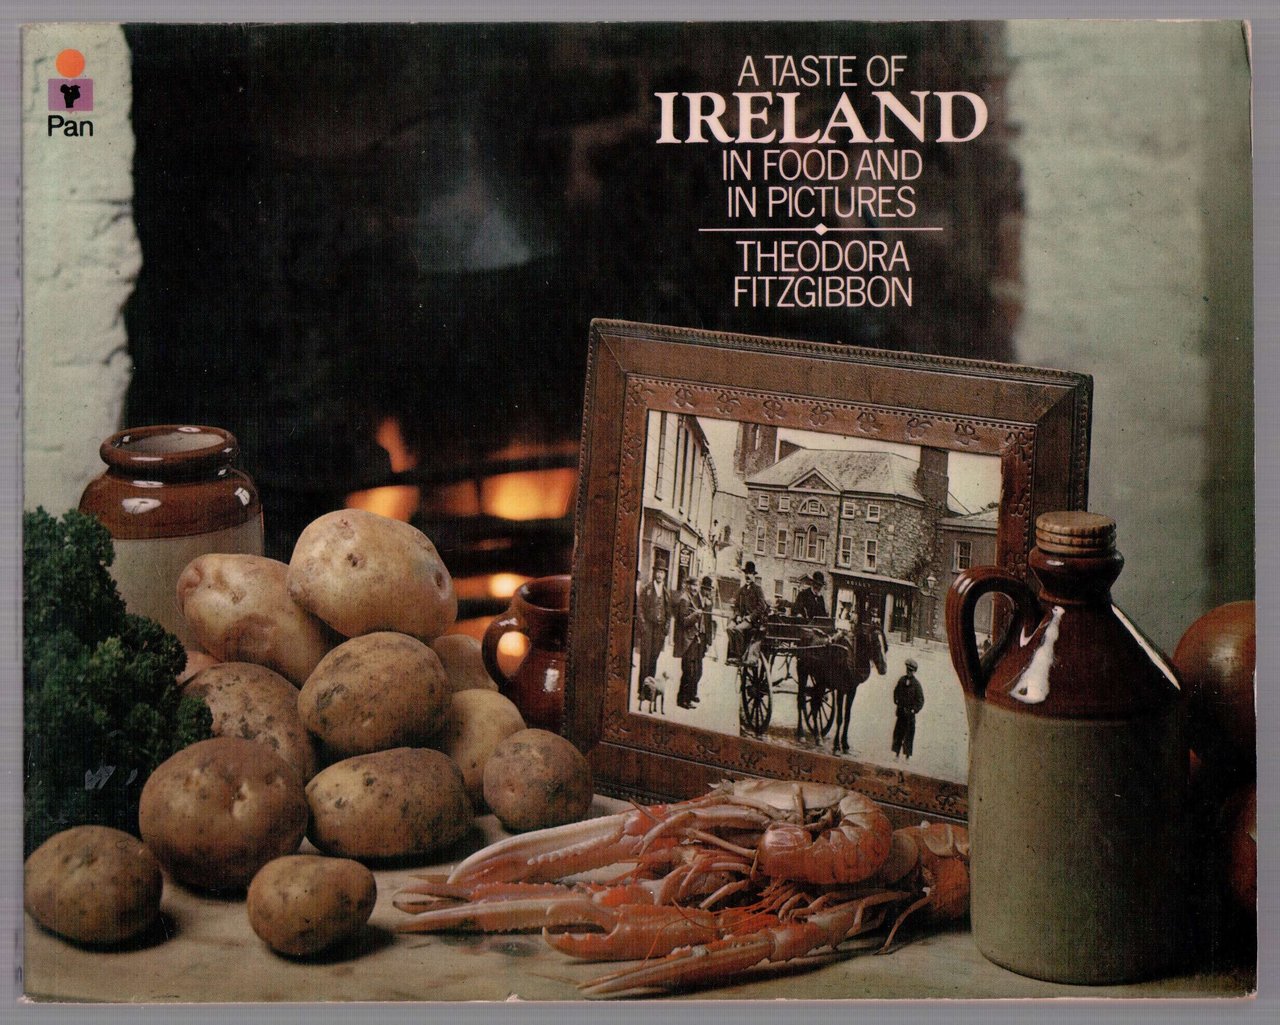 A taste of Ireland in food and in pictures